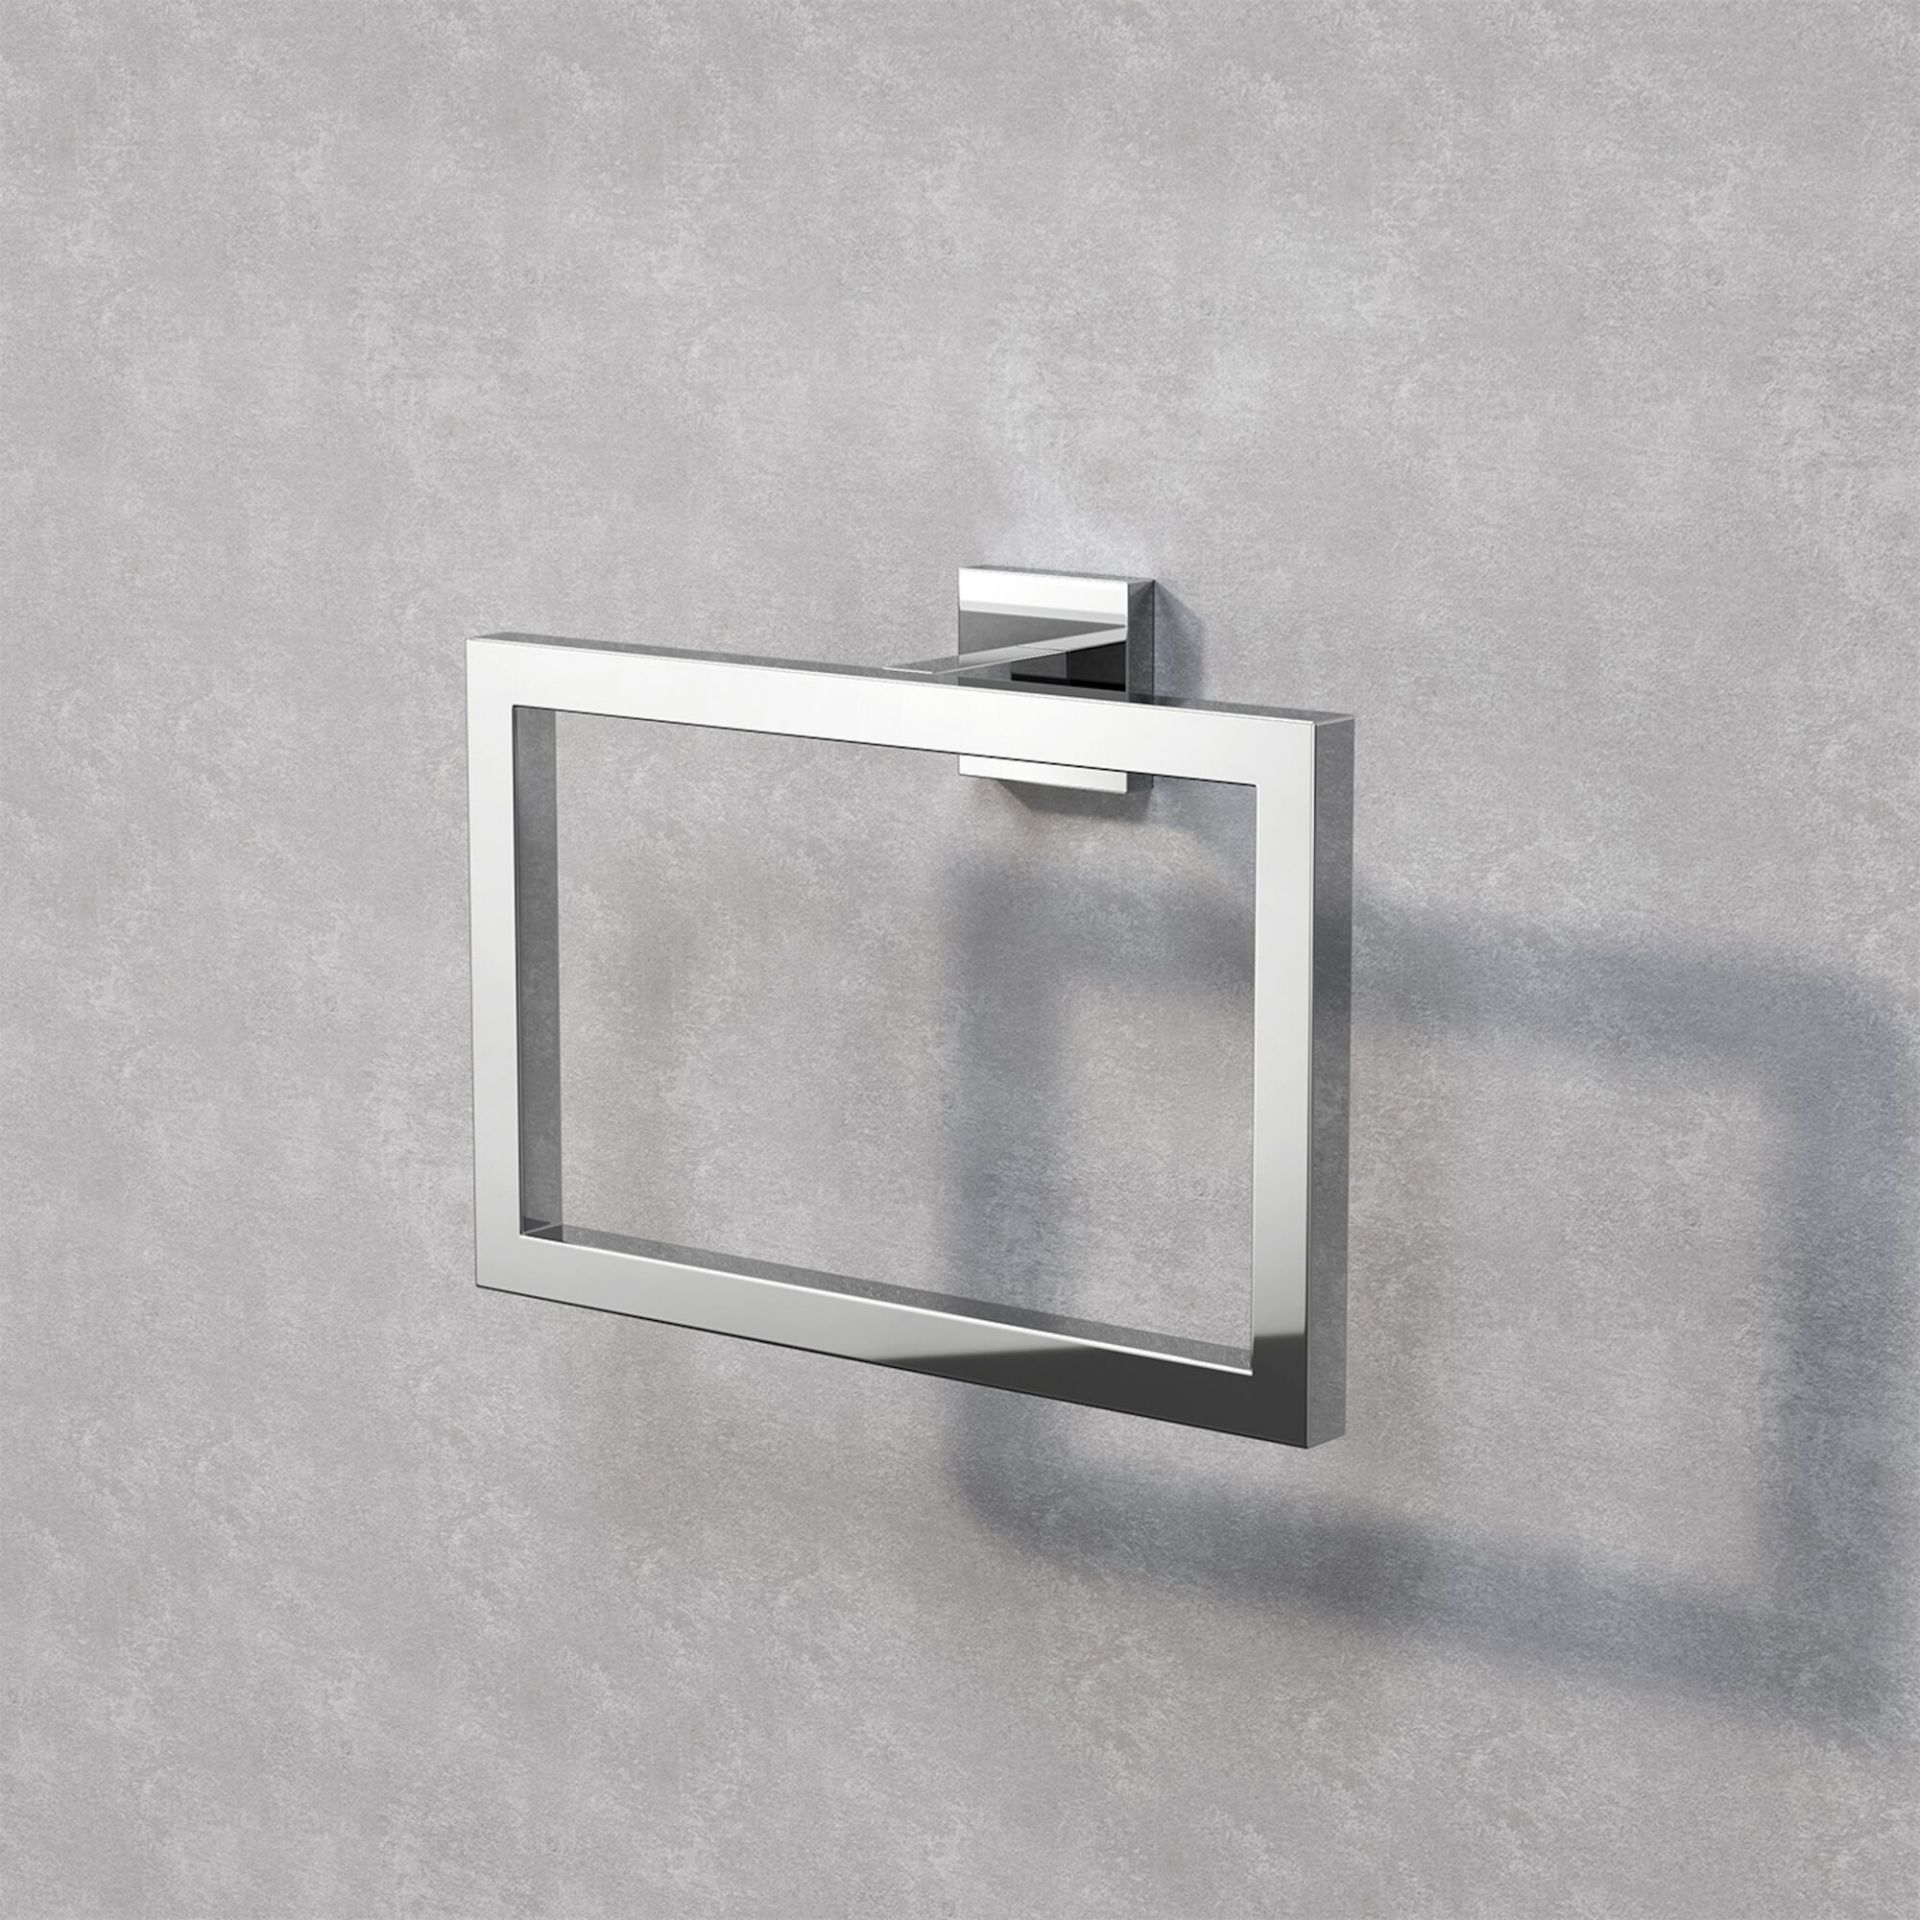 (M1076) Jesmond Towel Ring Finishes your bathroom with a little extra functionality and style ...